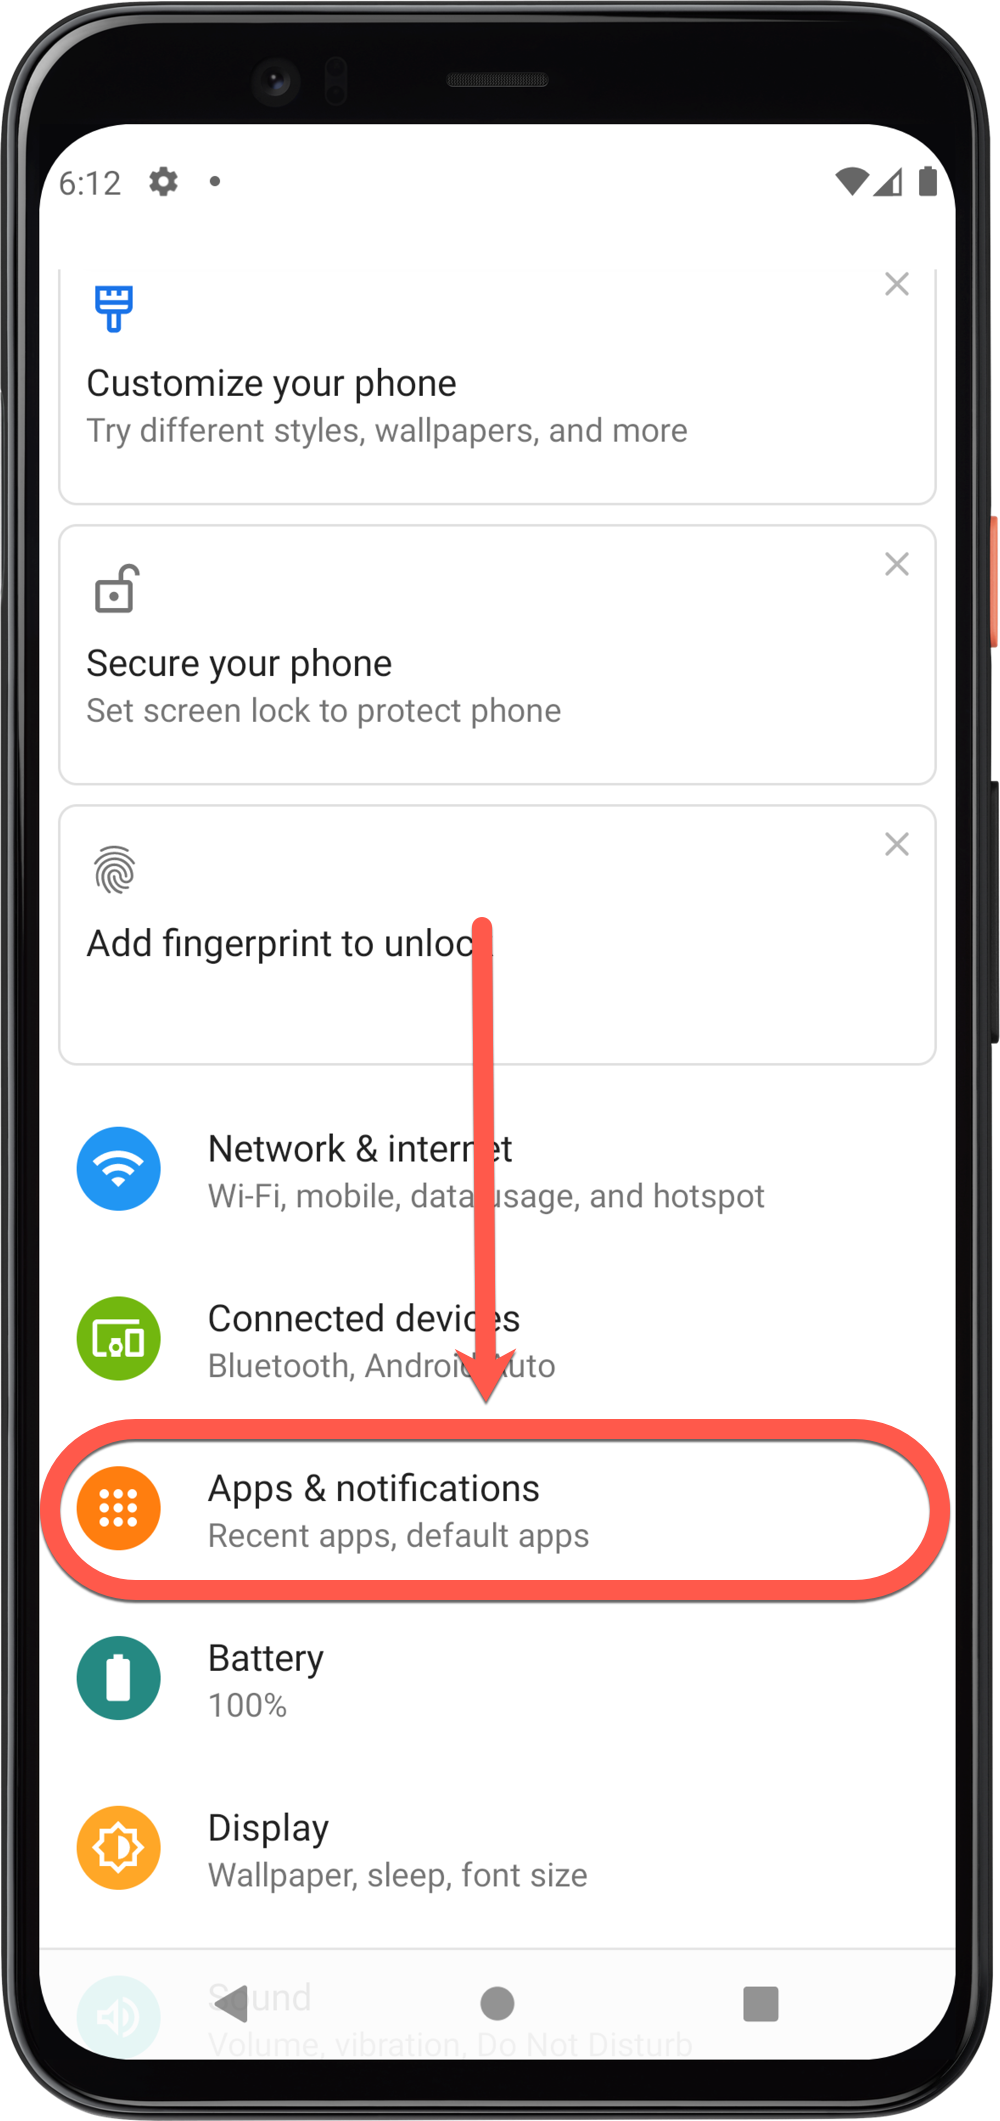 Apps & notifications